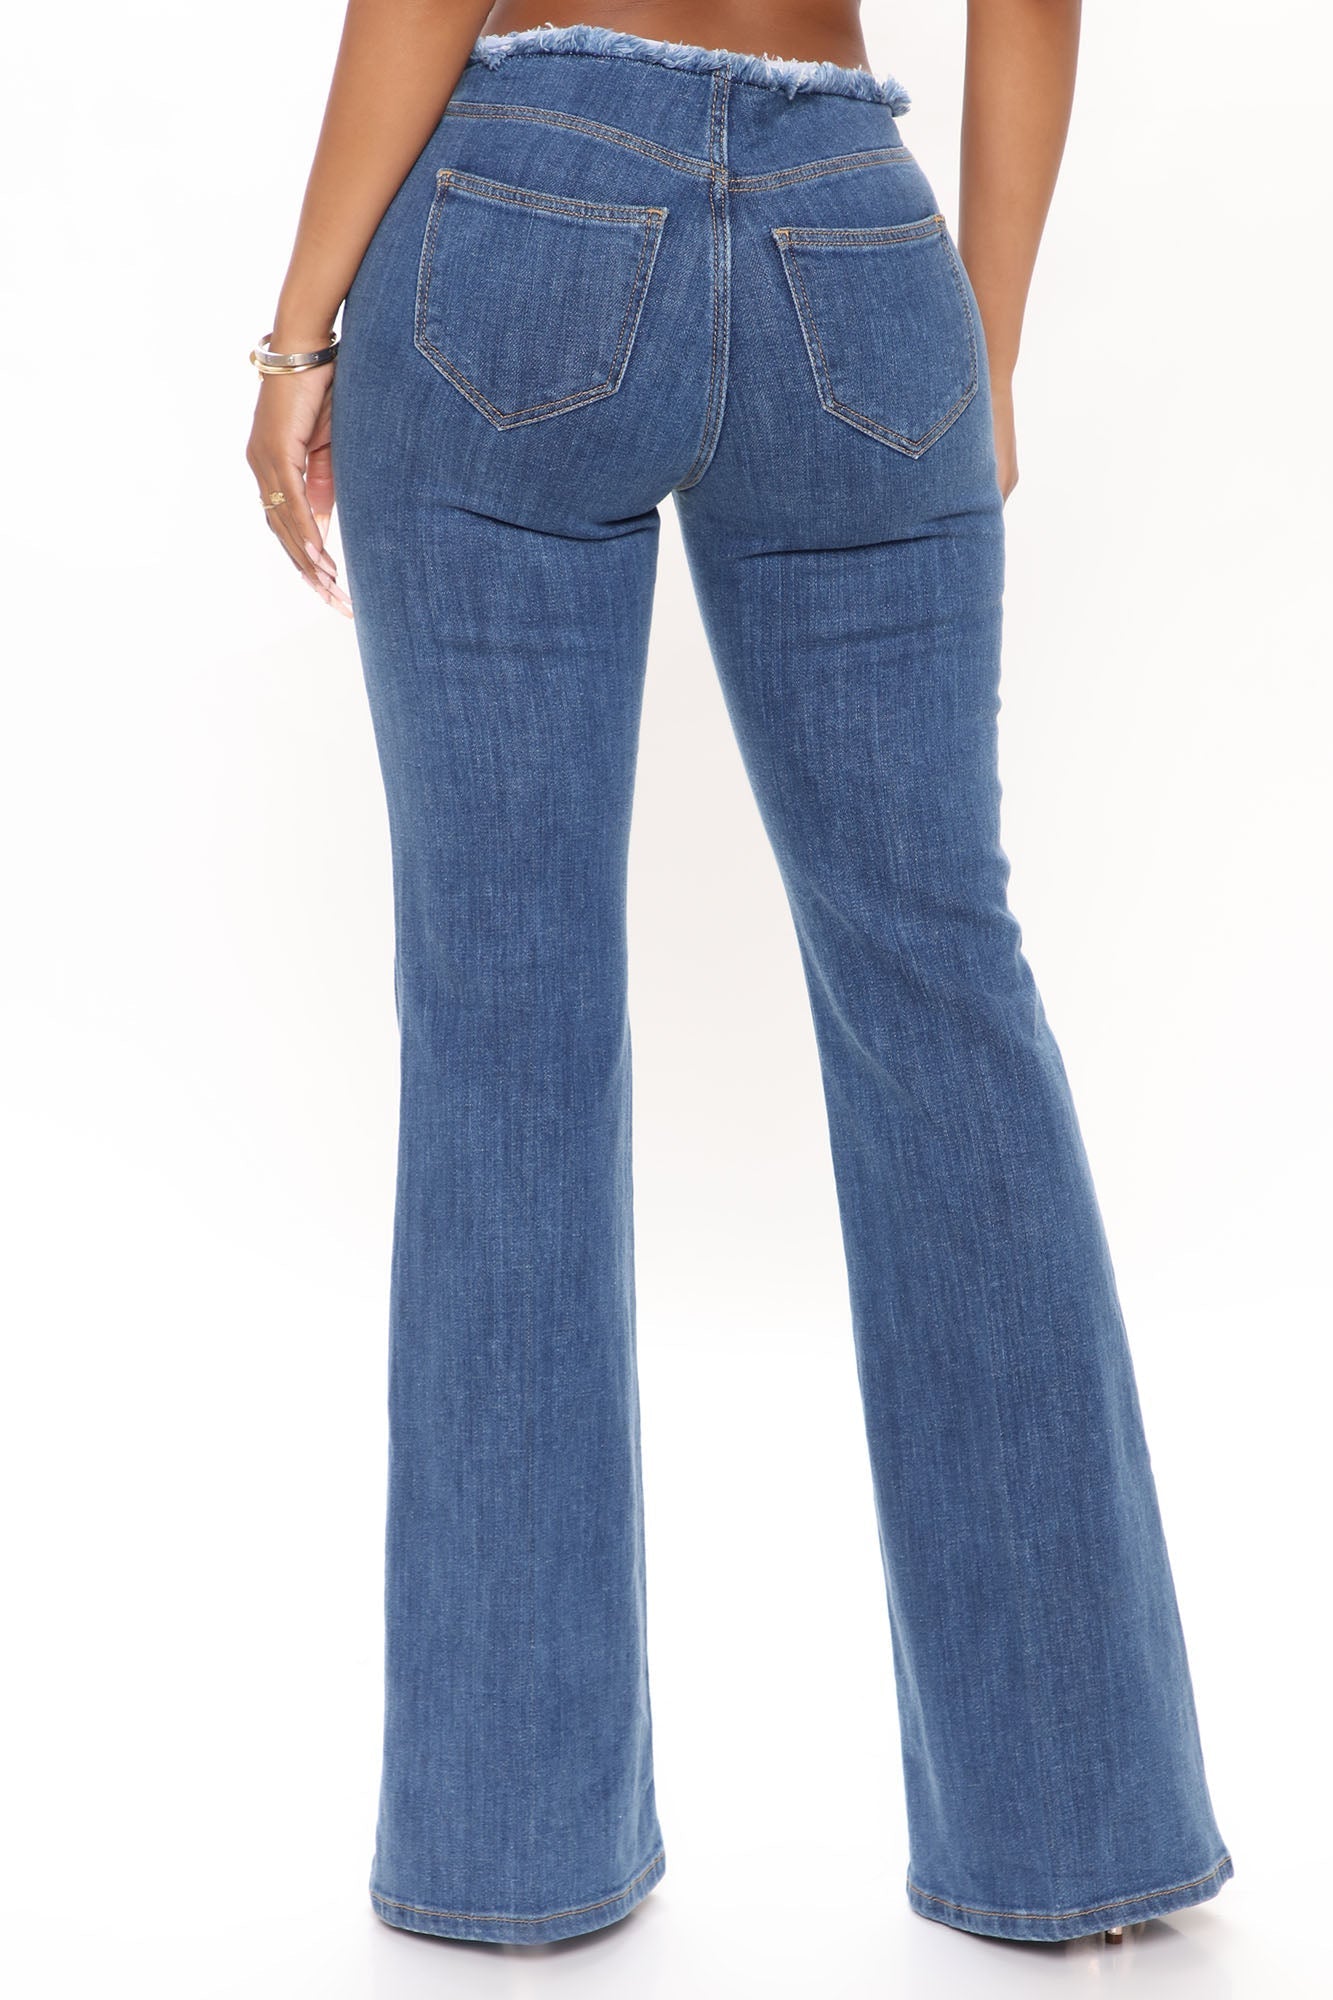 After All These Years Low Rise Flare Jeans - Medium Blue Wash